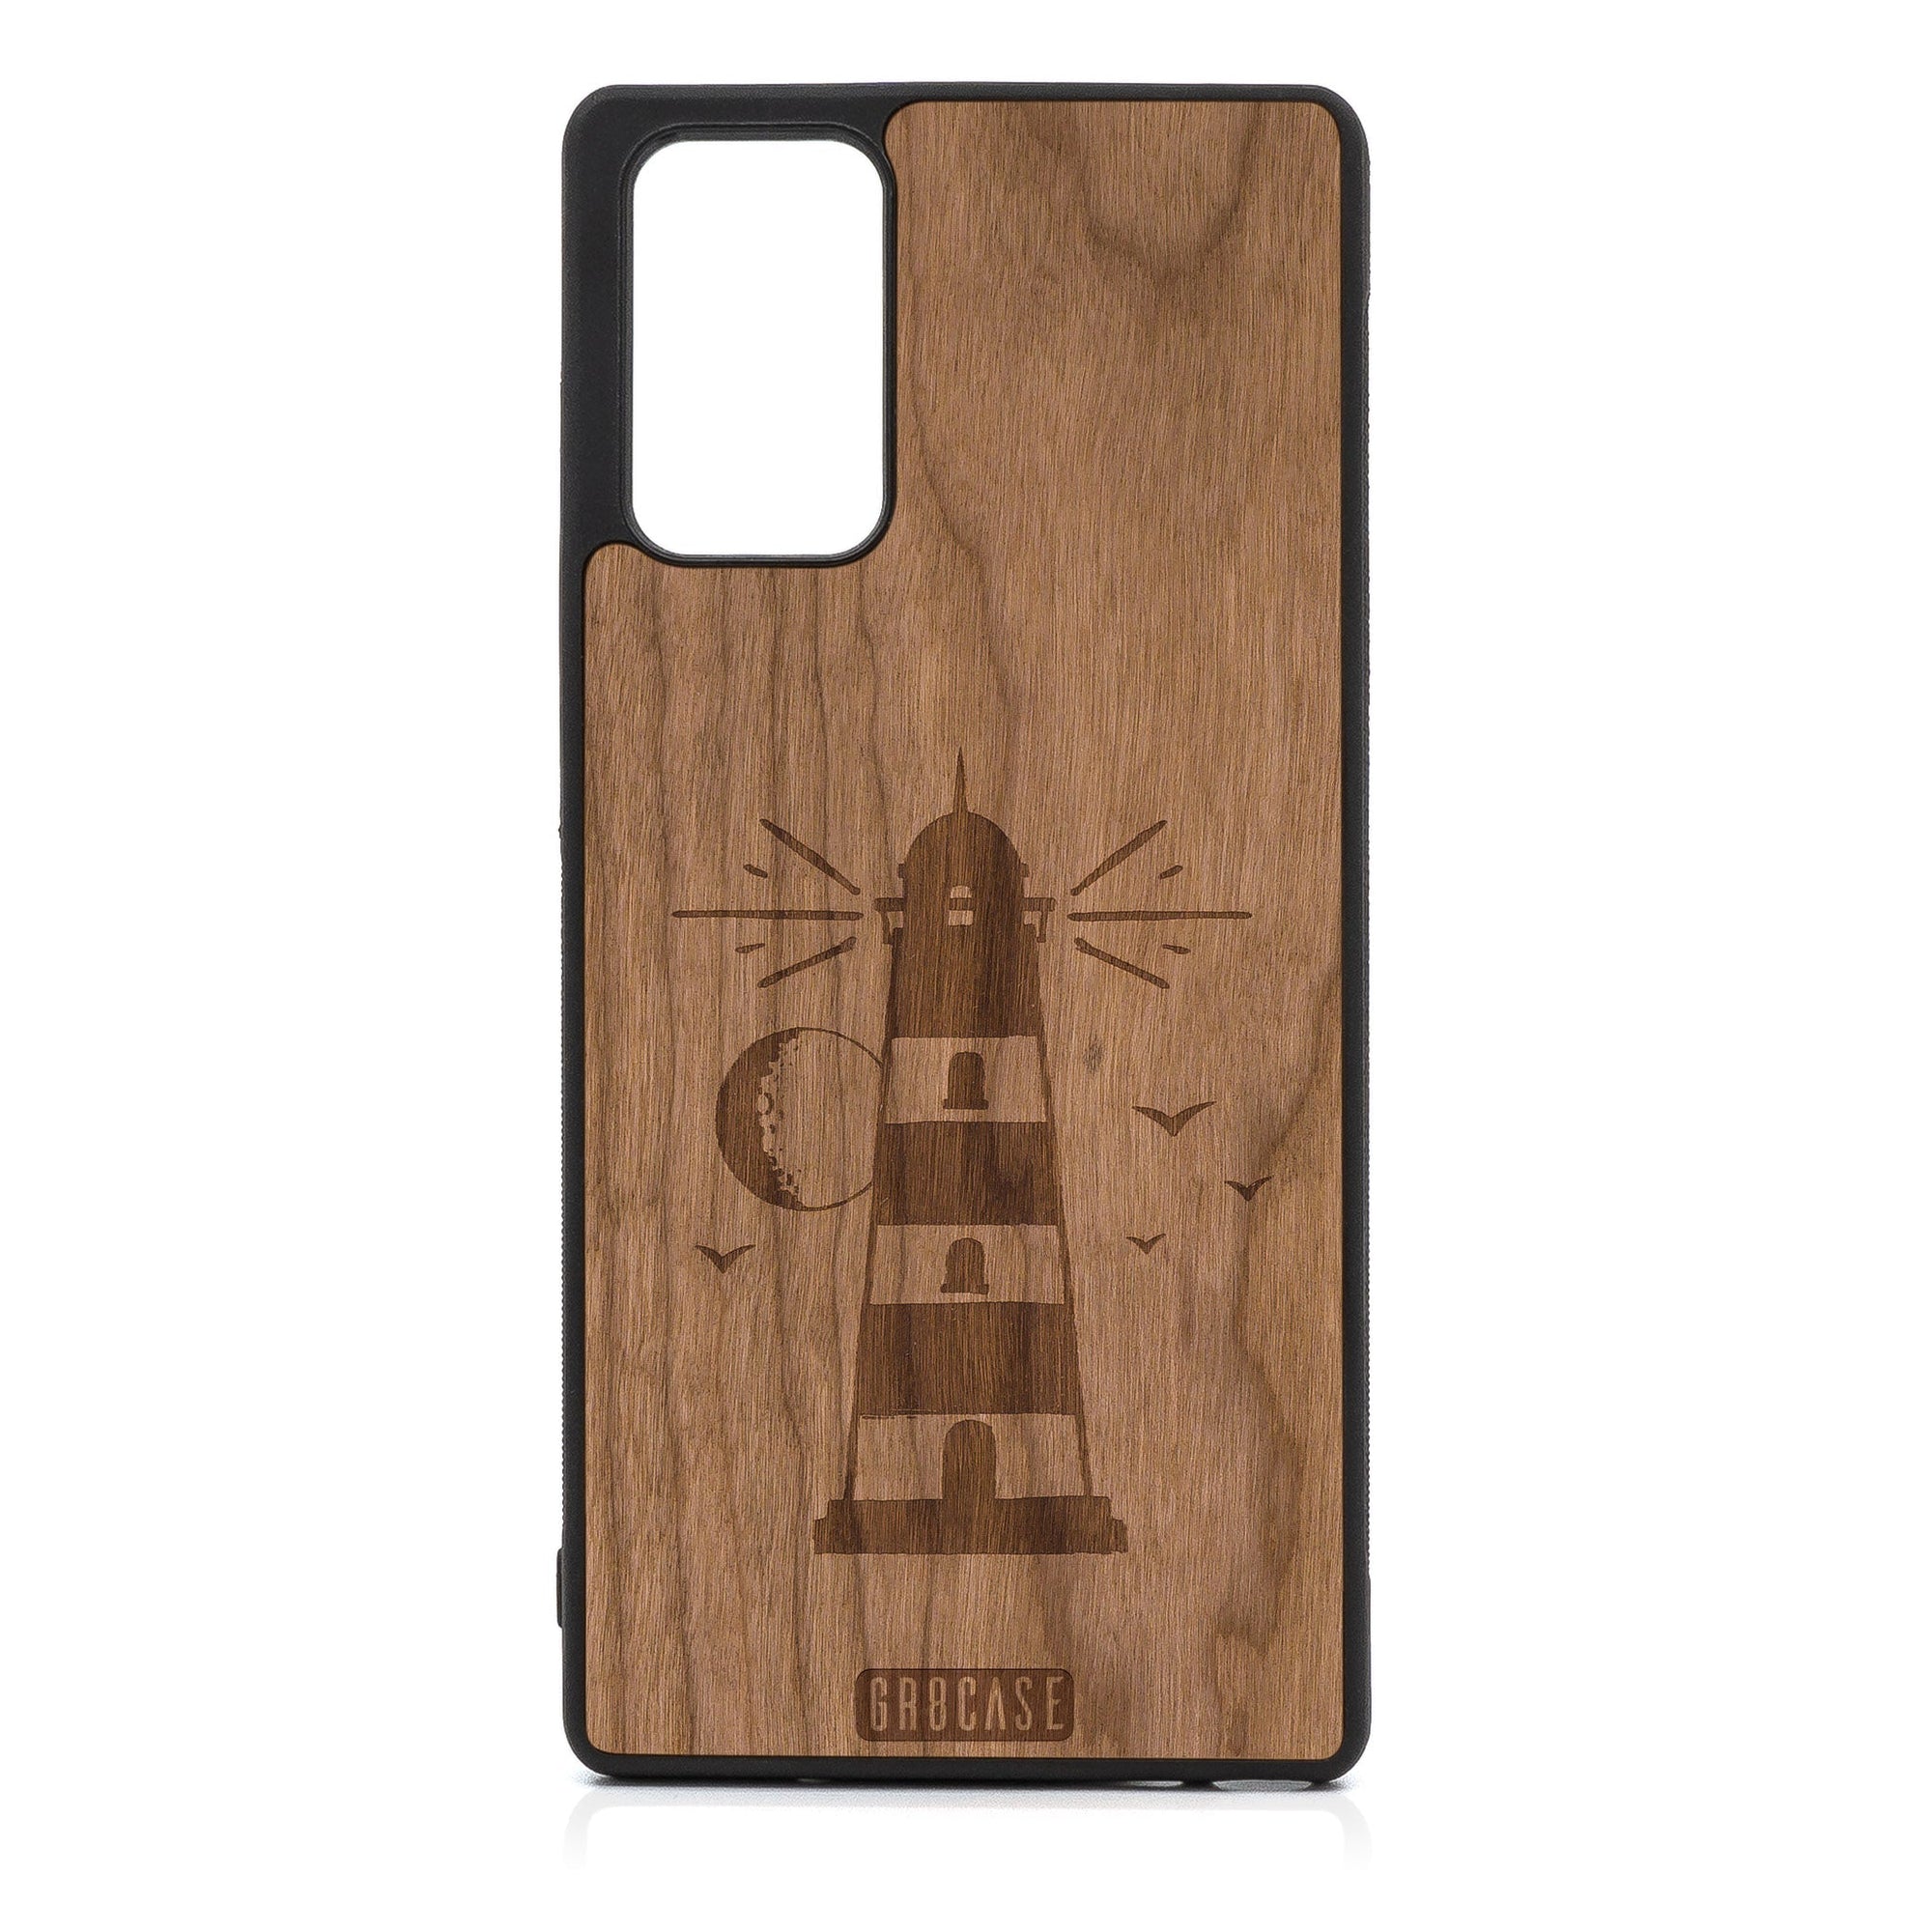 Midnight Lighthouse Design Wood Case For Samsung Galaxy A72 5G